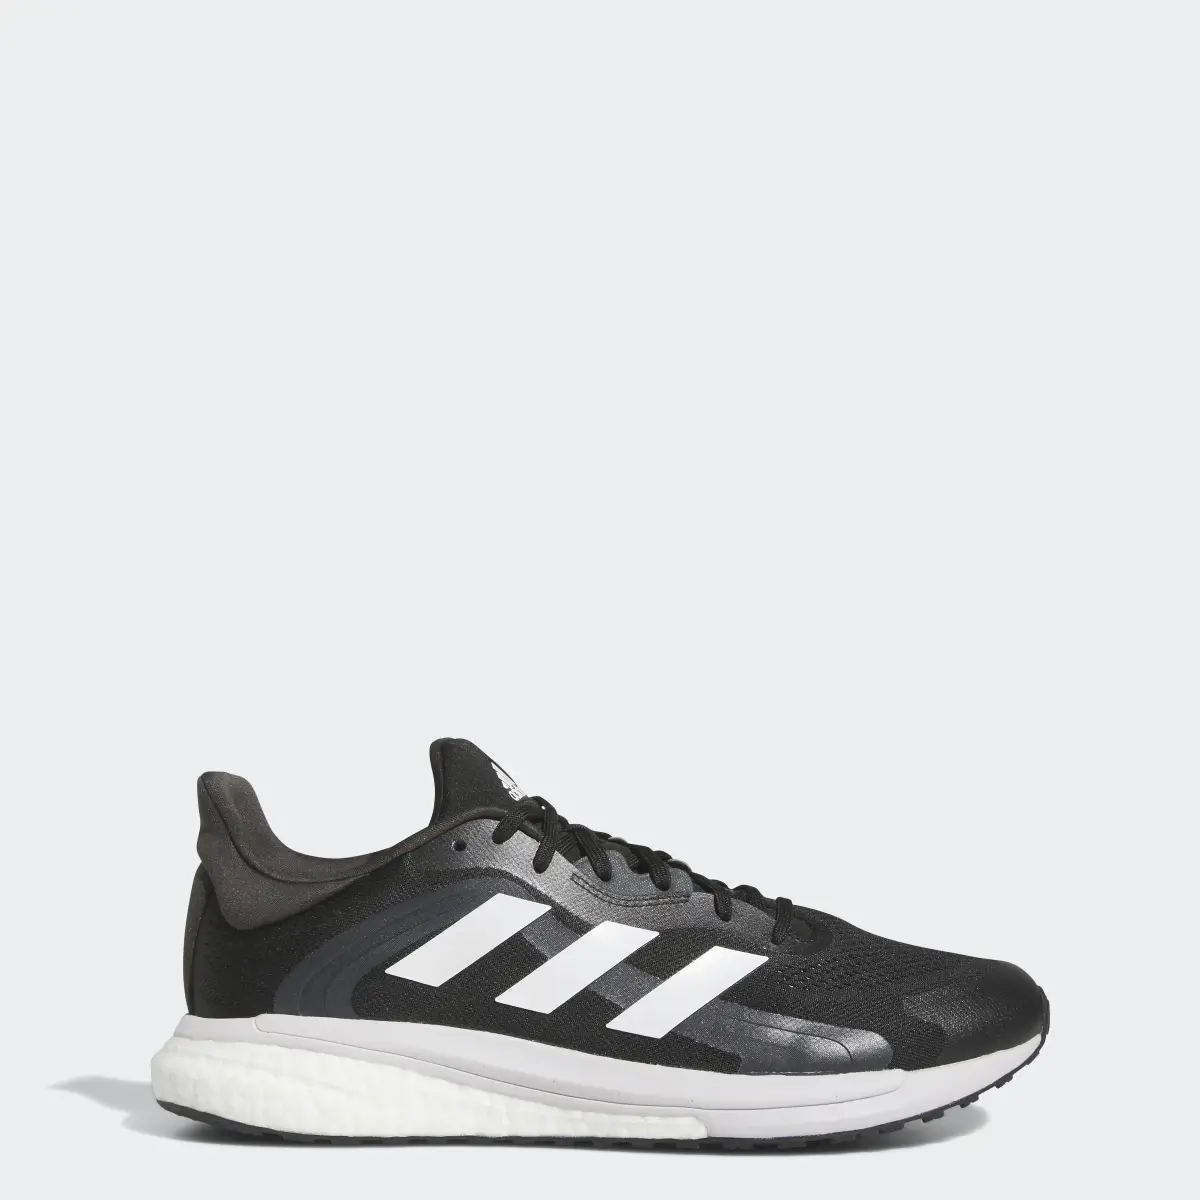 Adidas Sapatilhas SolarGlide 4 ST. 1